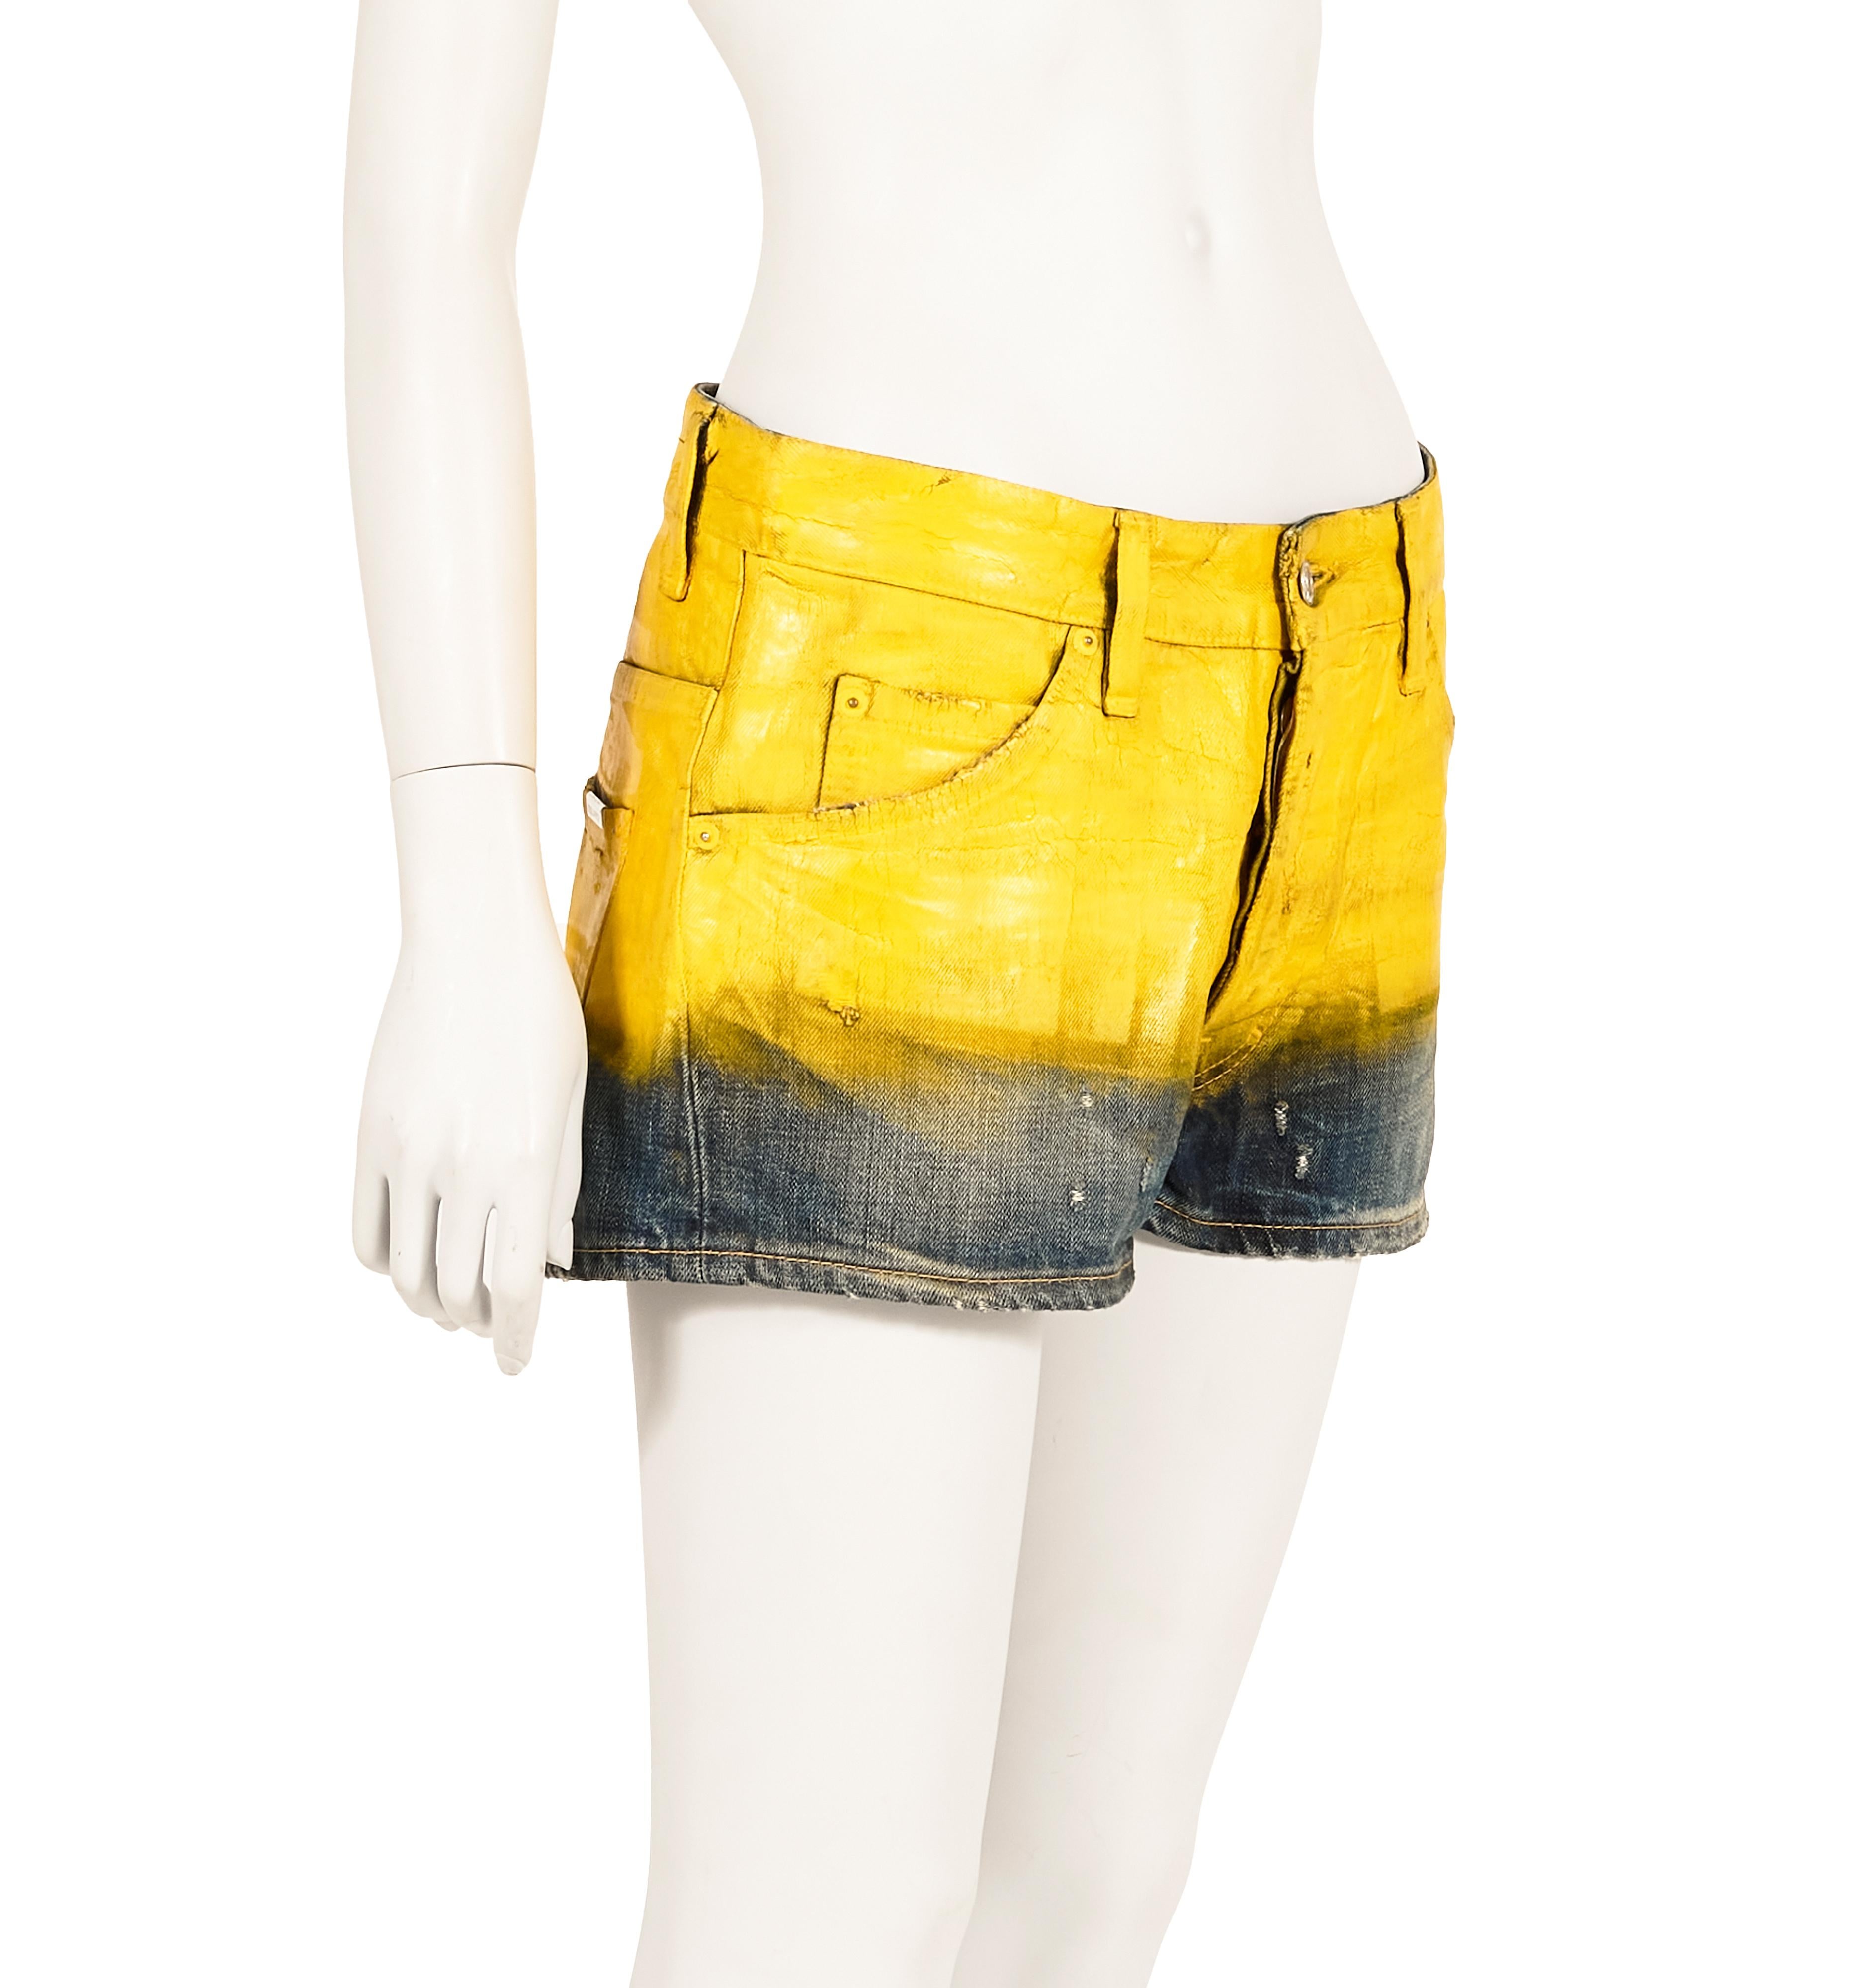 - Dsquared2 Spring Summer 2010 collection
- Sold by Gold Palms Vintage 
- Low rise dark-wash denim shorts
- Yellow varnish paint coat
- Size: IT 40 

Measurements (laid flat)

Waist: 37,5 cm / 14.7 inch
Length: 28 cm / 11 inch